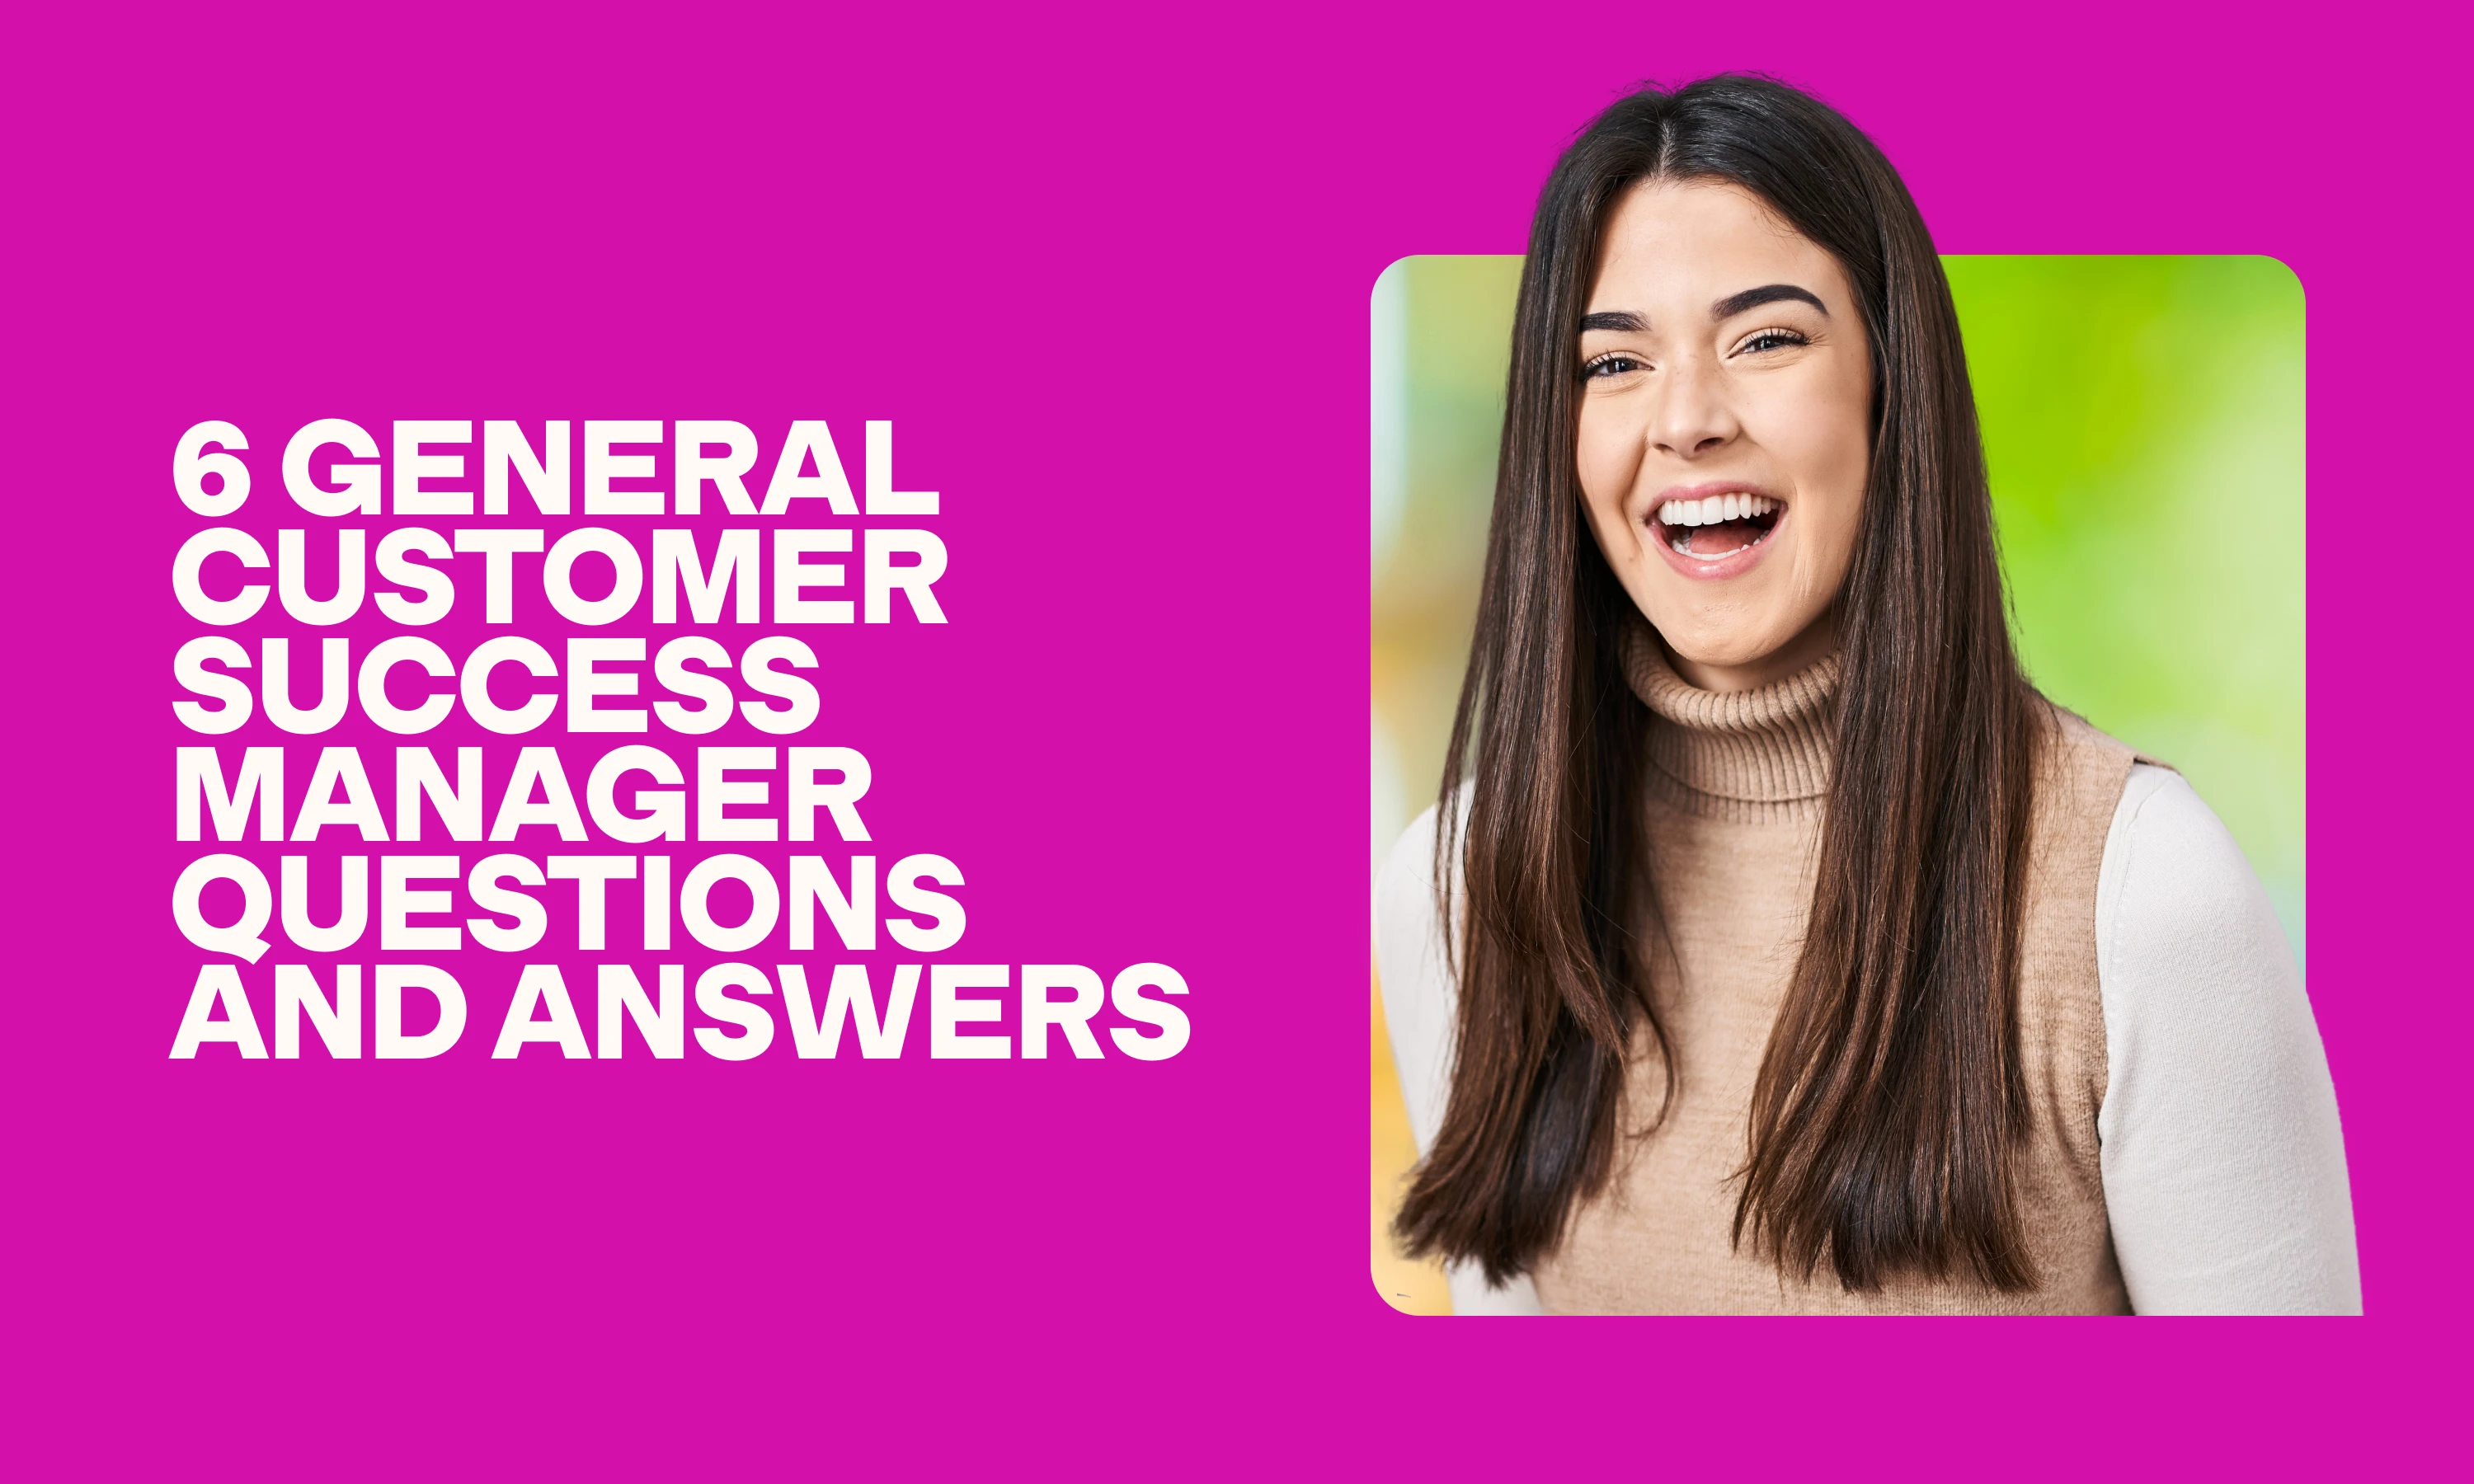 image showing general customer success manager interview questions and answers